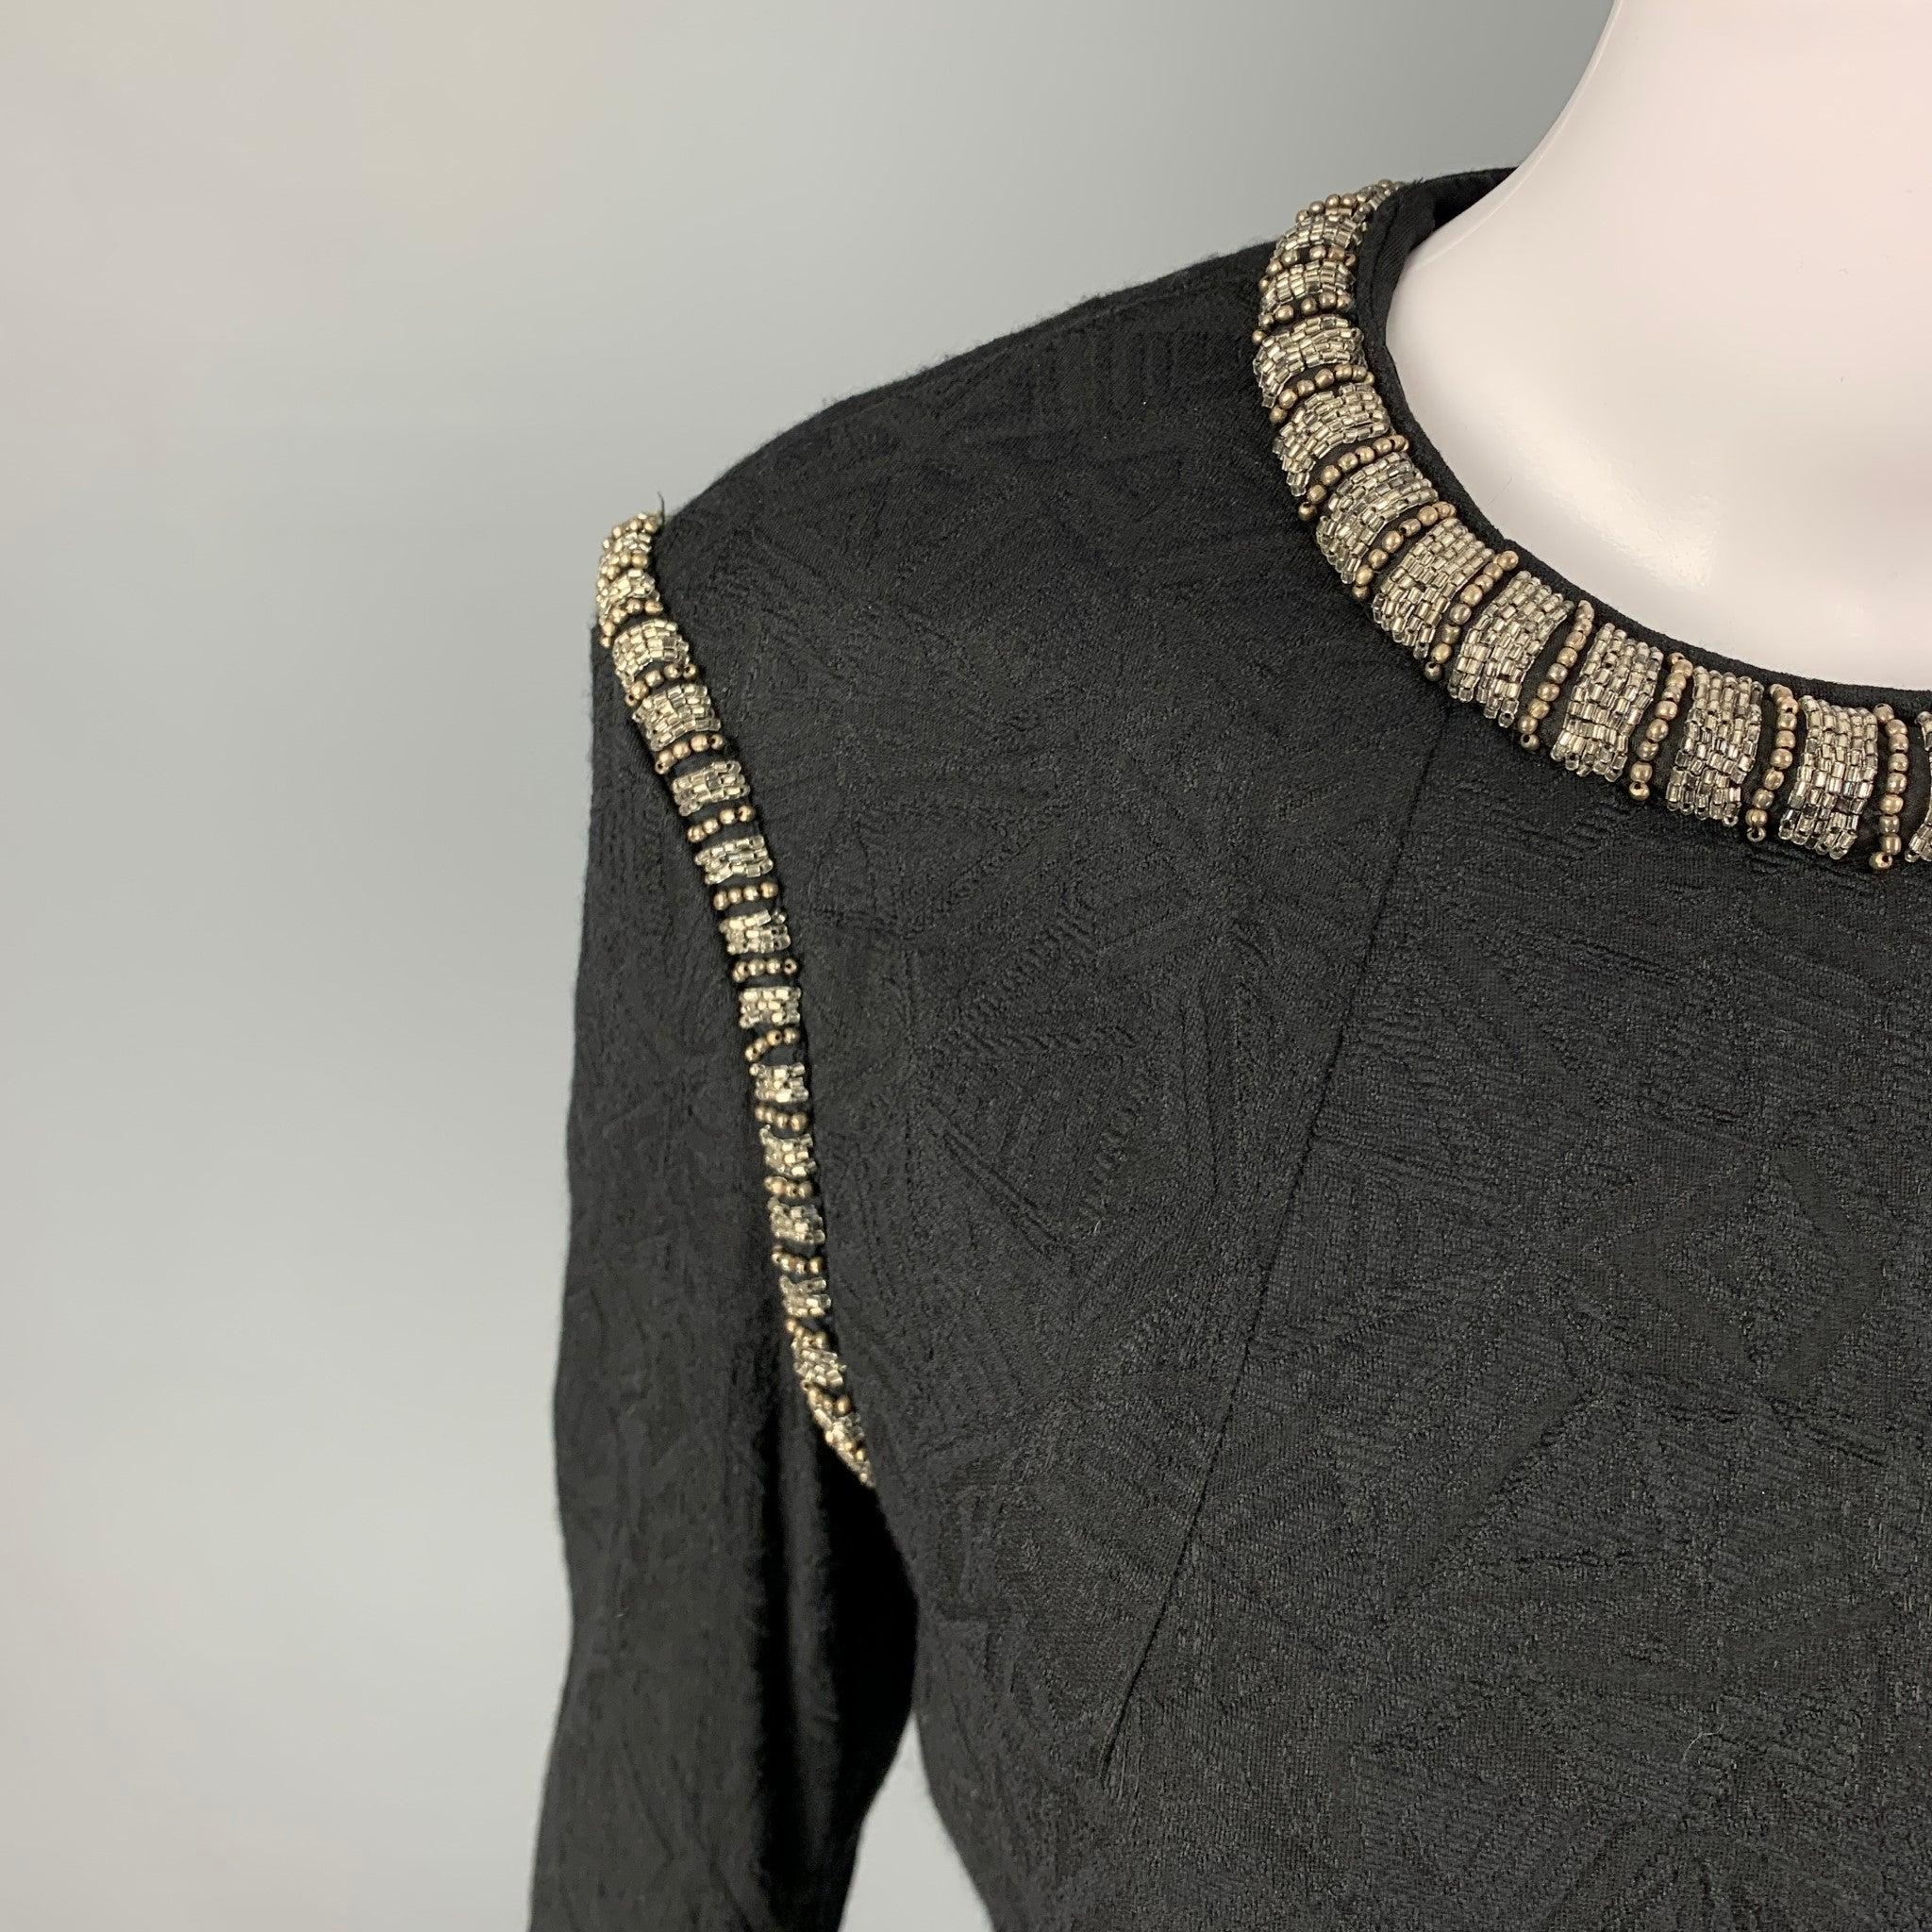 DRIES VAN NOTEN dress top comes in a black jacquard wool blend featuring a beaded trim, crew-neck, and a back zip up closure.
Excellent
Pre-Owned Condition. 

Marked:   38 

Measurements: 
 
Shoulder:
16.5 inches Bust: 34 inches Sleeve: 22.5 inches